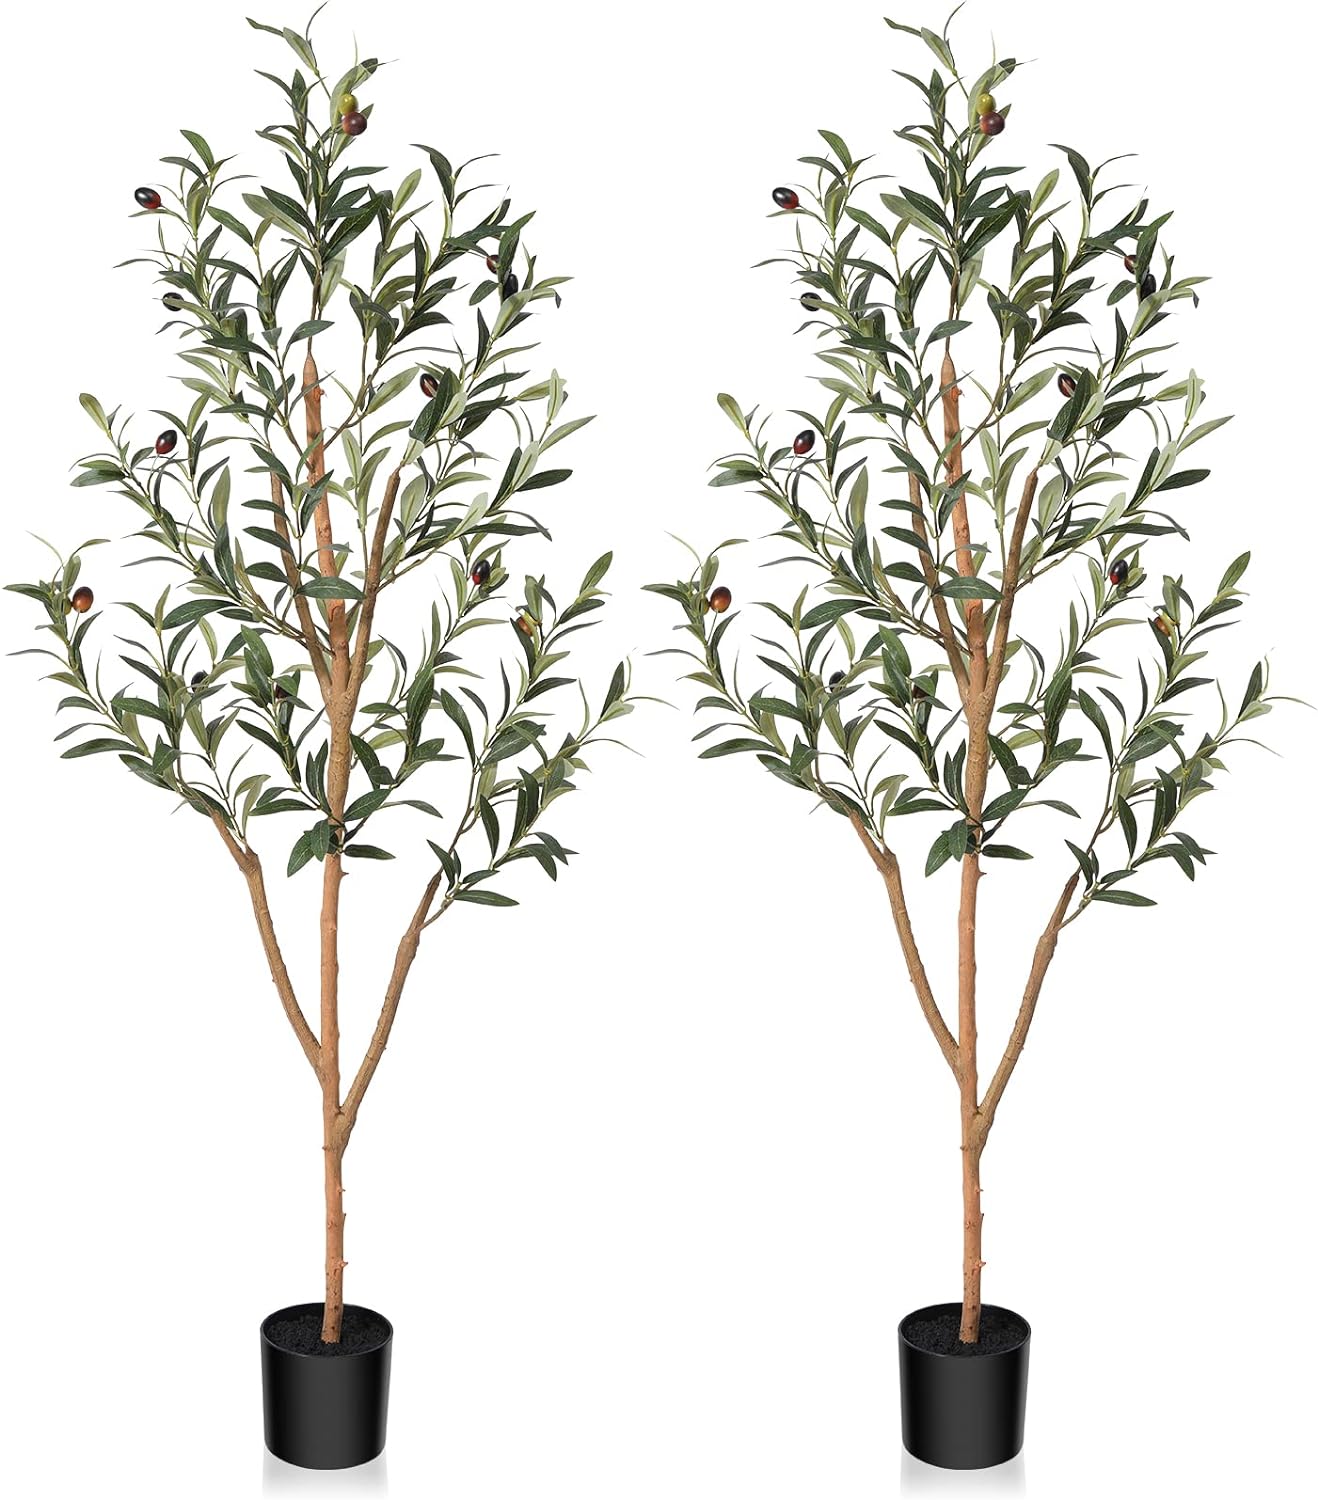 Kazeila Artificial Olive Tree 6FT Tall Faux Silk Plant for Home Office Decor Indoor Fake Potted Tree with Natural Wood Trunk and Lifelike Fruits